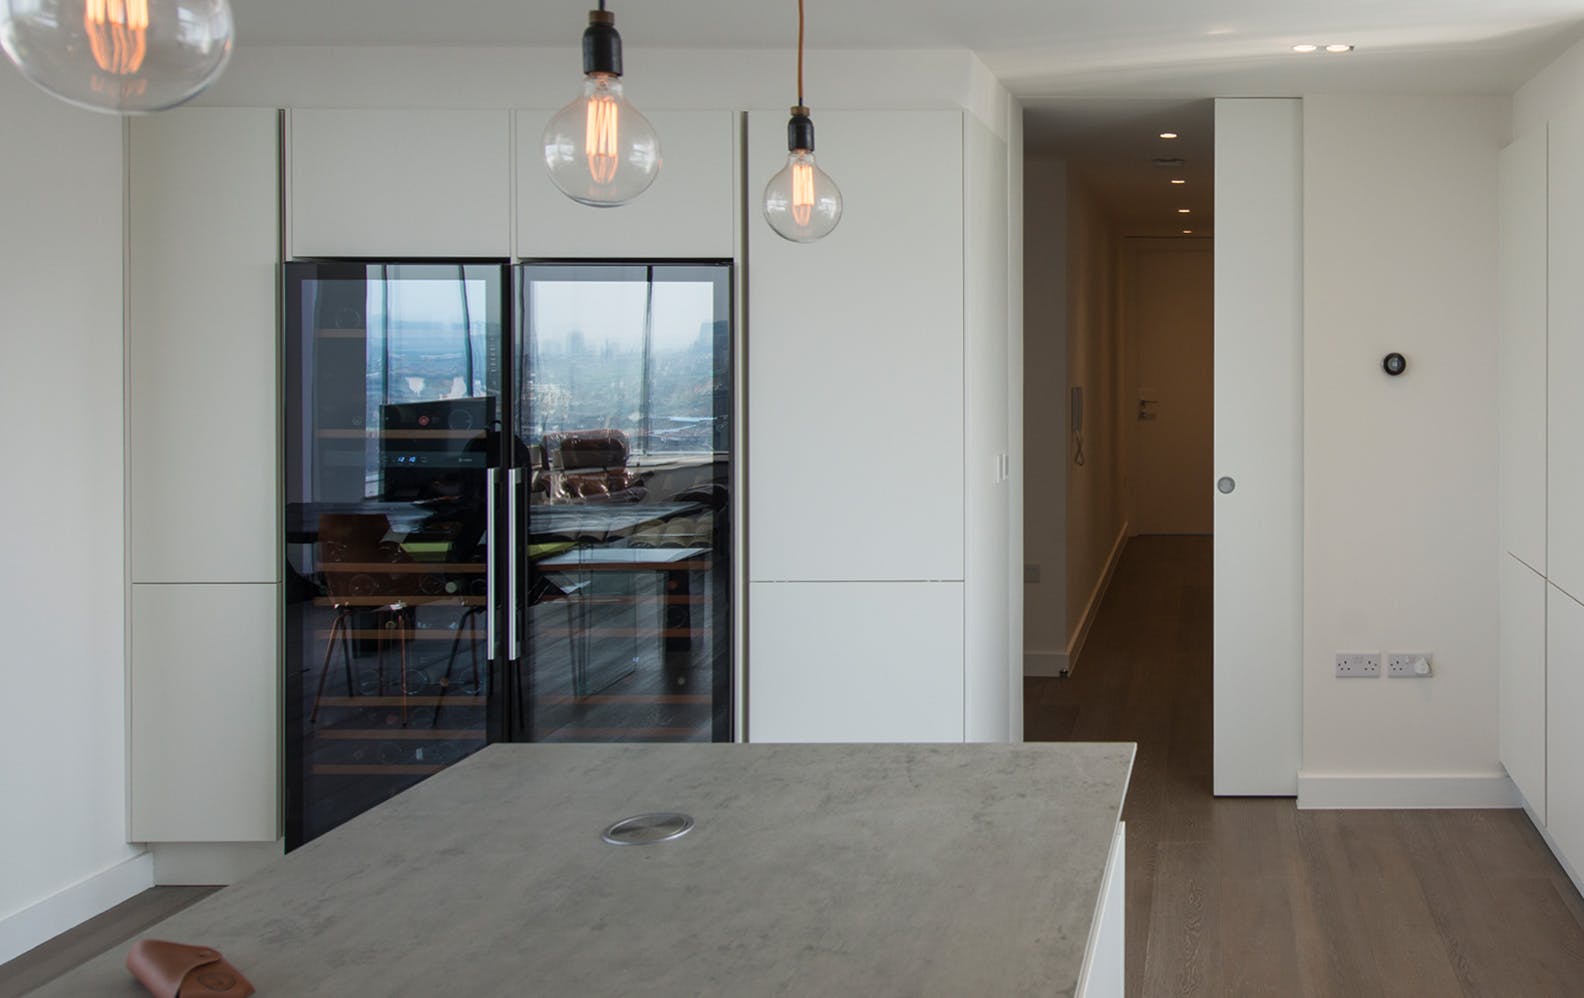 White, contemporary kitchen with a Deuren, full height pocket door - Trem, painted white. that opens on to a corridor.